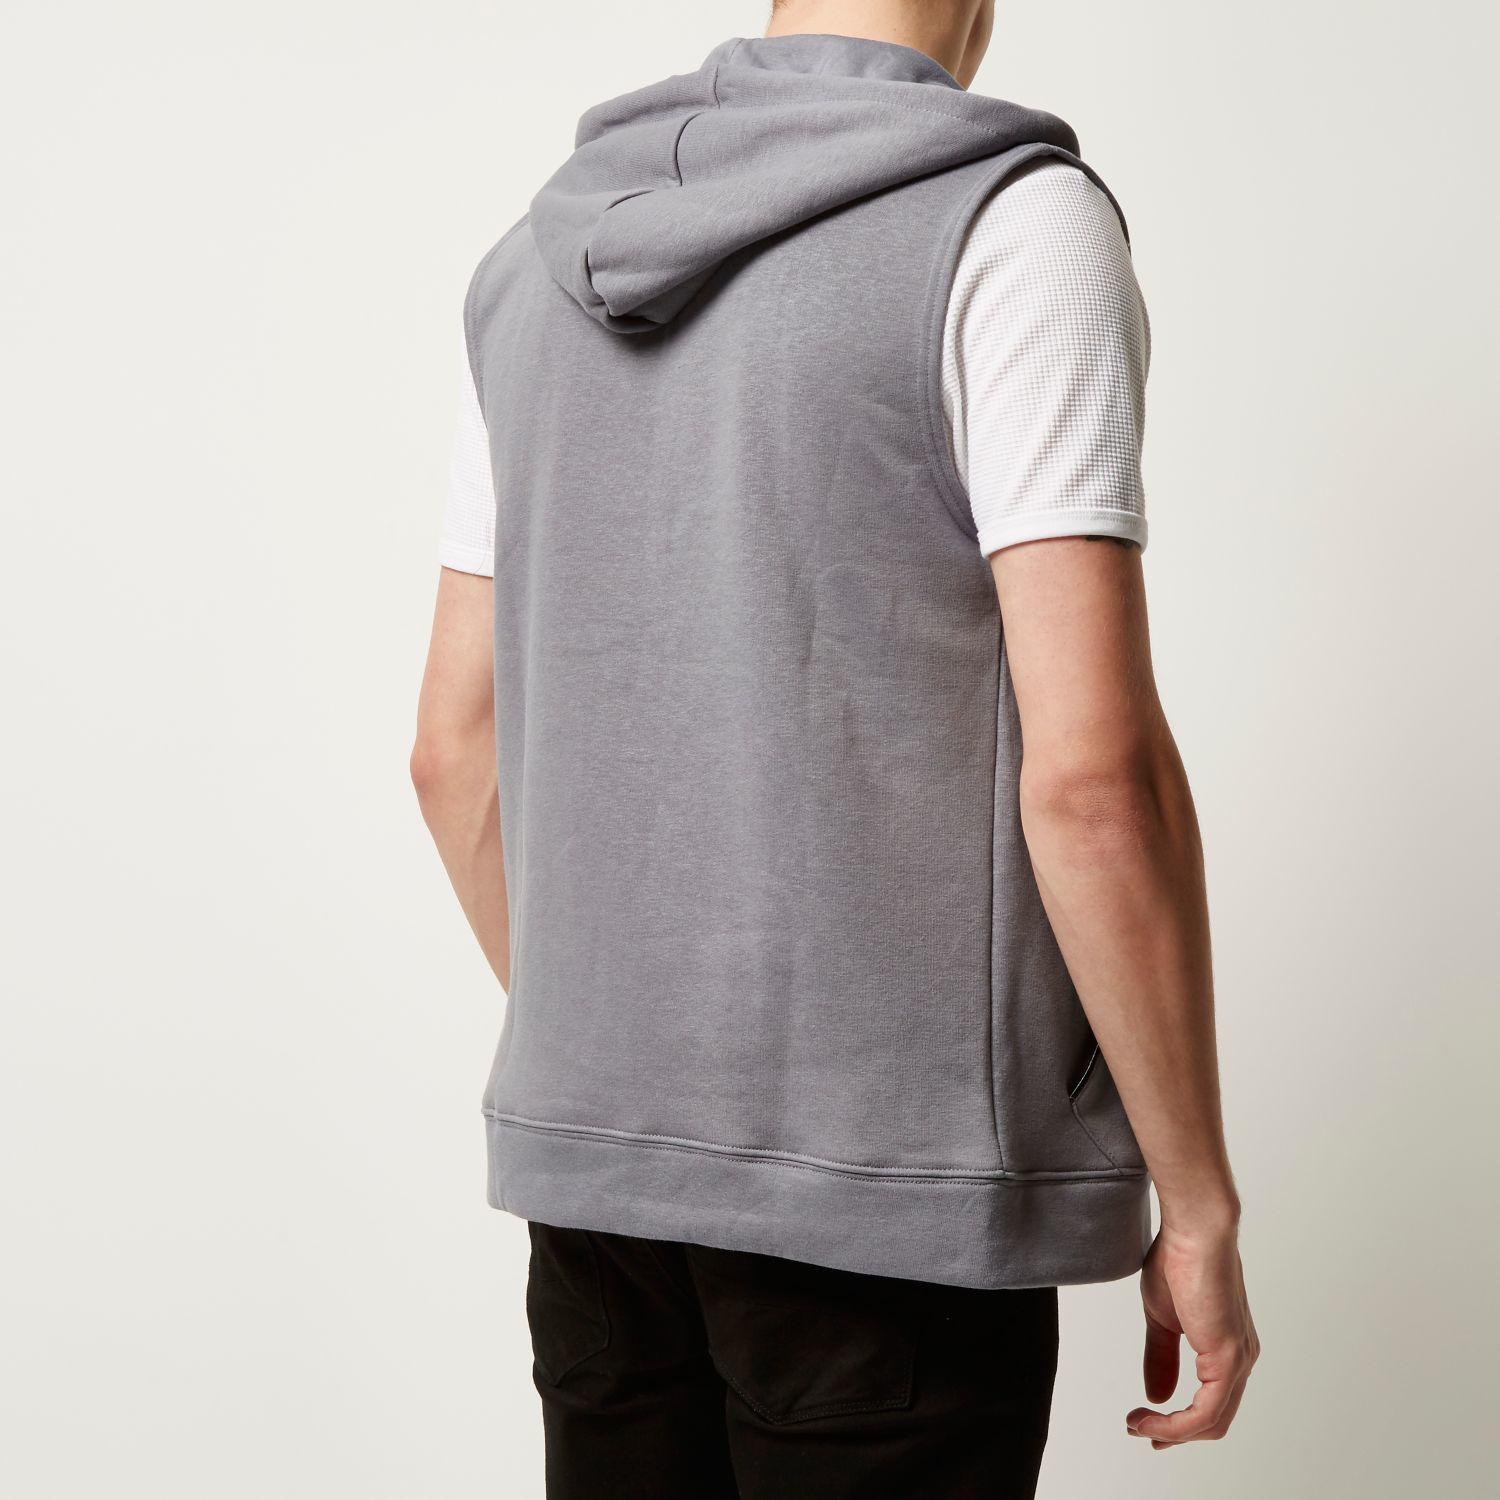 River Island Cotton Grey Zip-up Sleeveless Hoodie in Gray for Men - Lyst